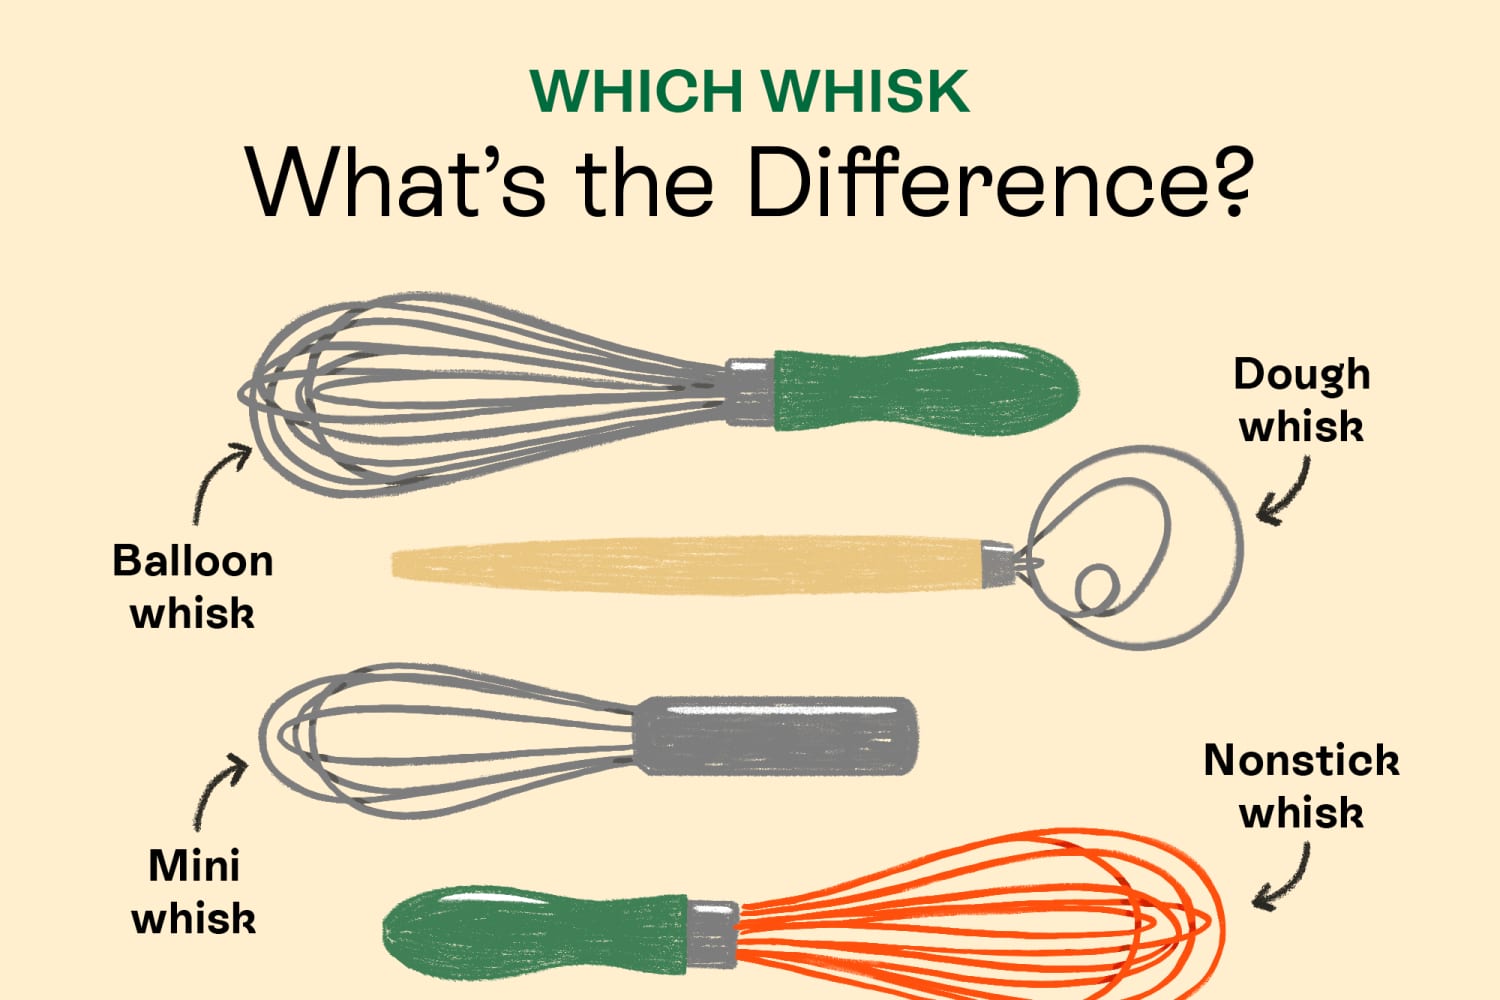 What Are the Different Types of Whisks Used For?